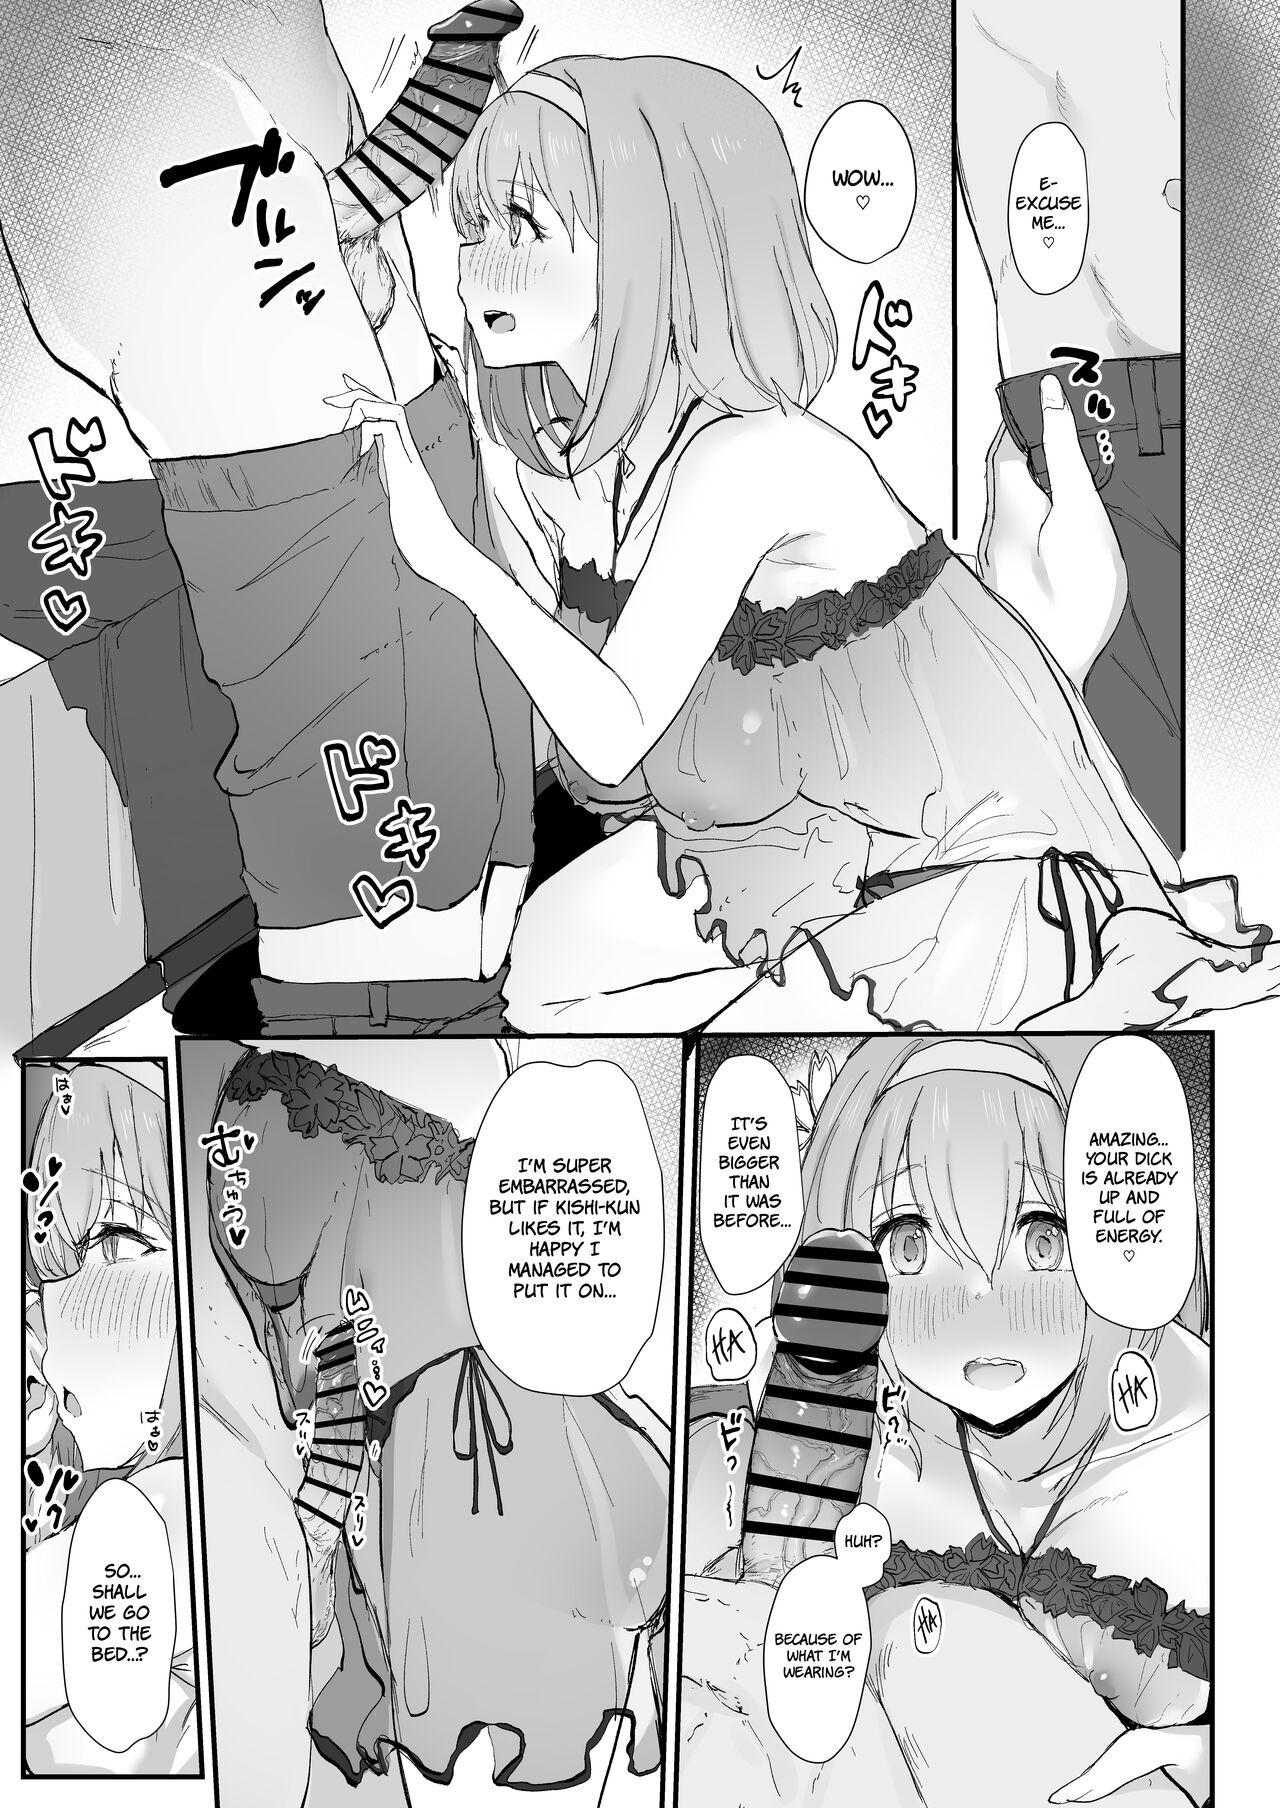 Gloryhole Yui to Icha Love Ecchi Suru hon | A Book About Making Sweet Love with Yui - Princess connect Star - Page 5